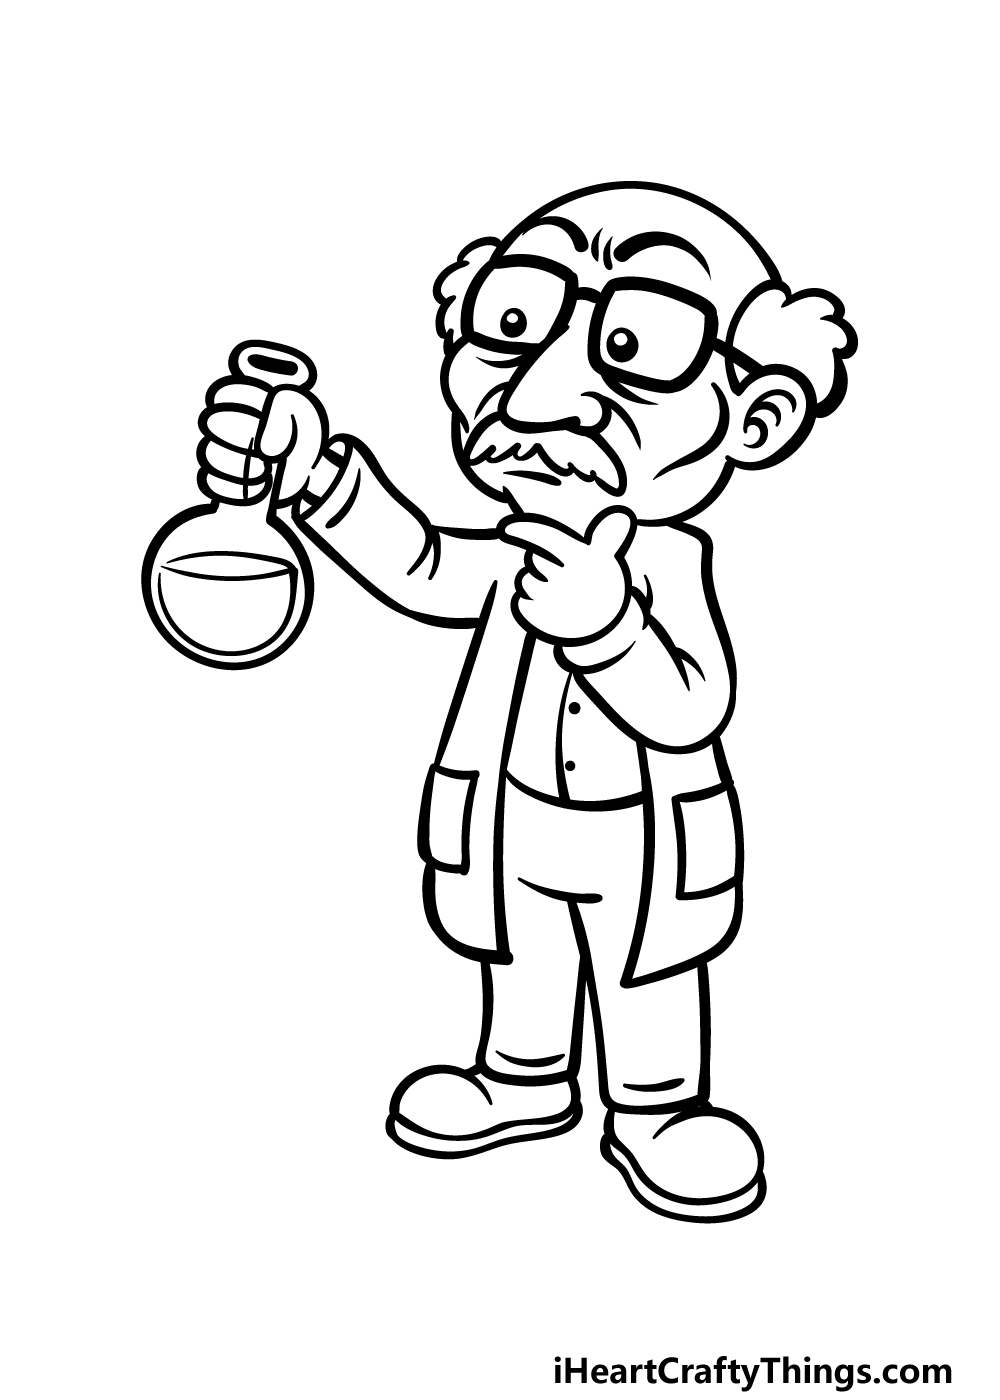 Cartoon Scientist Drawing - How To Draw A Cartoon Scientist Step By Step